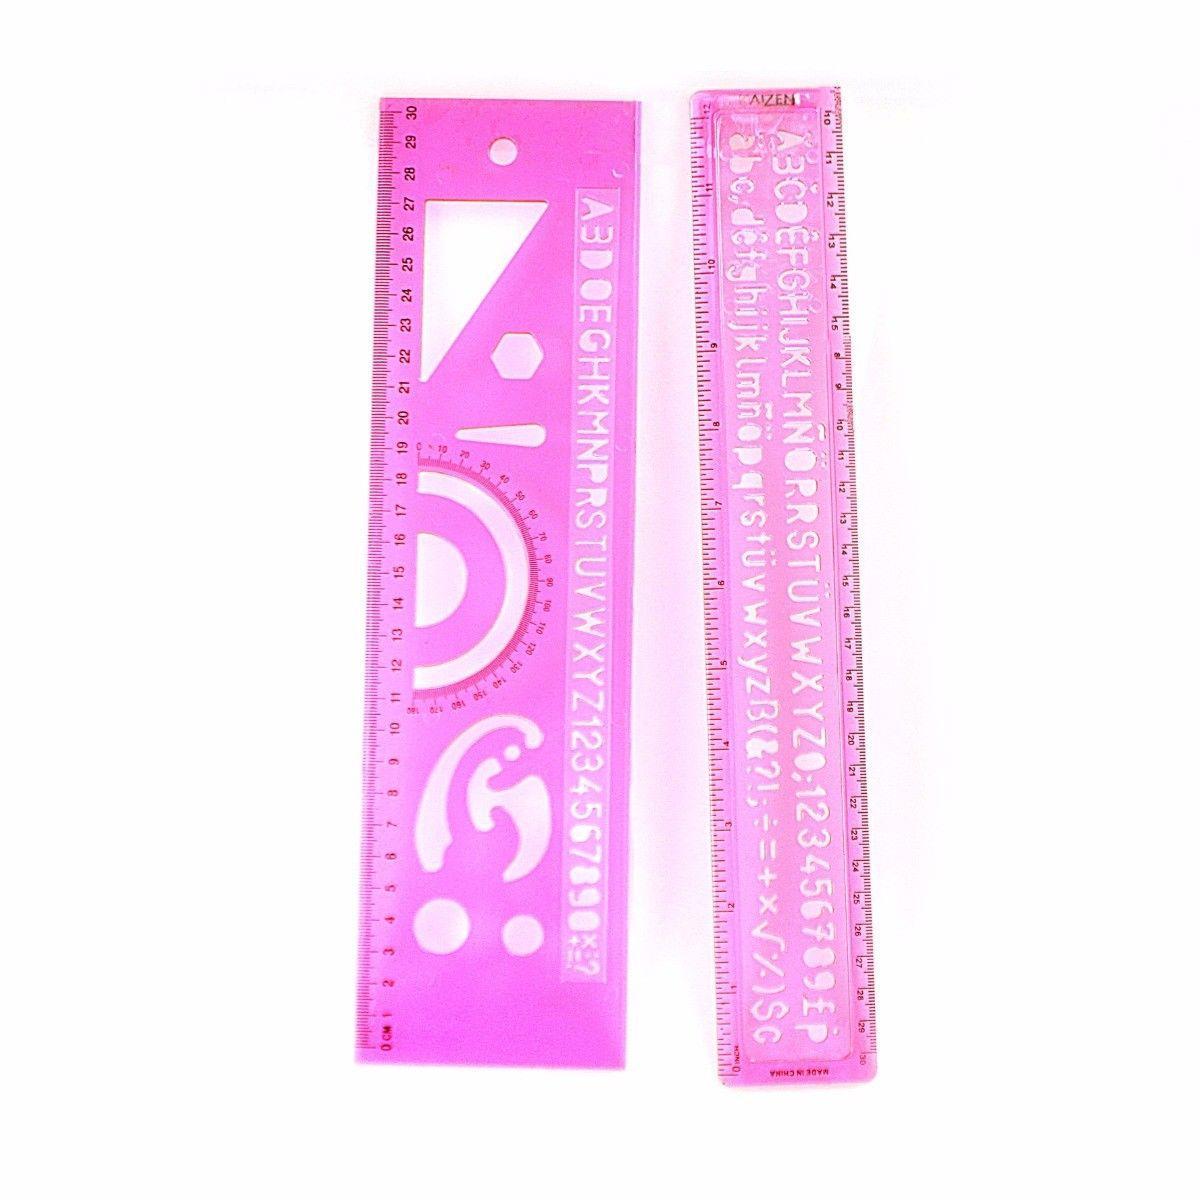 Ruler and Alphabet Set In Pink and Green 2 Pack   3005 (Large Letter Rate)